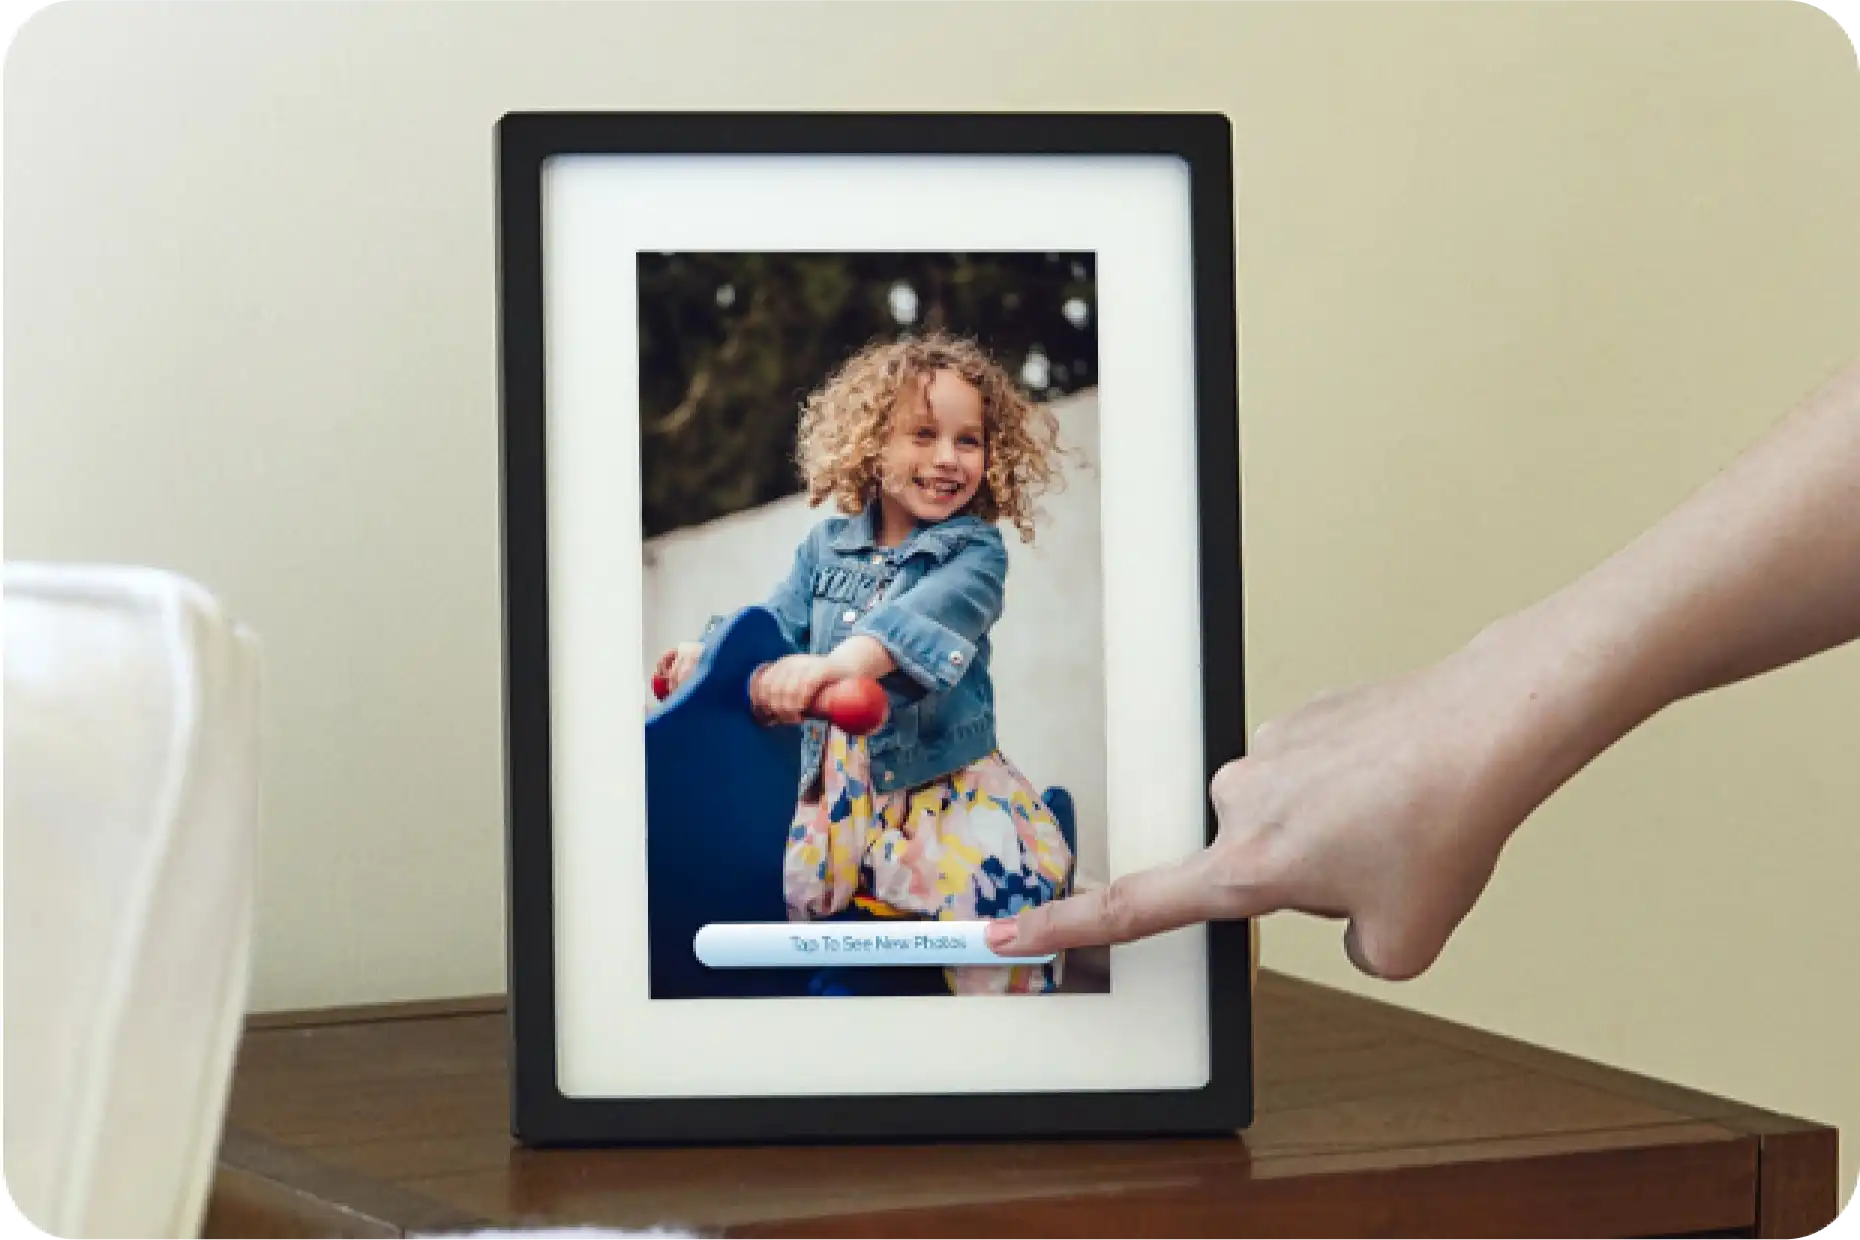 A portrait skylight frame where user clicks on the notification for new photos arriving to the frame